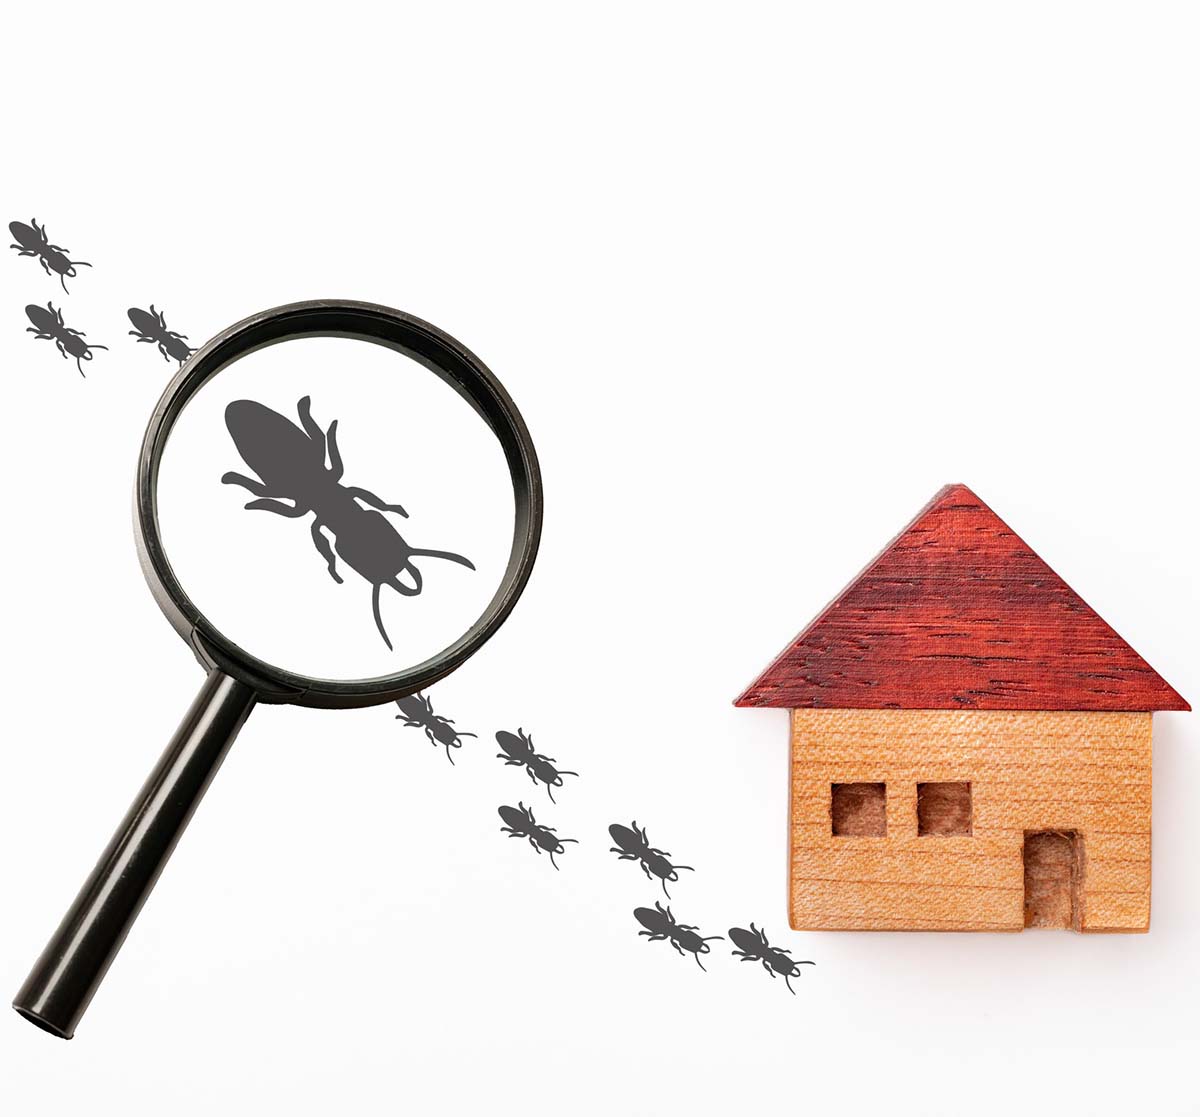 Common Household Pests